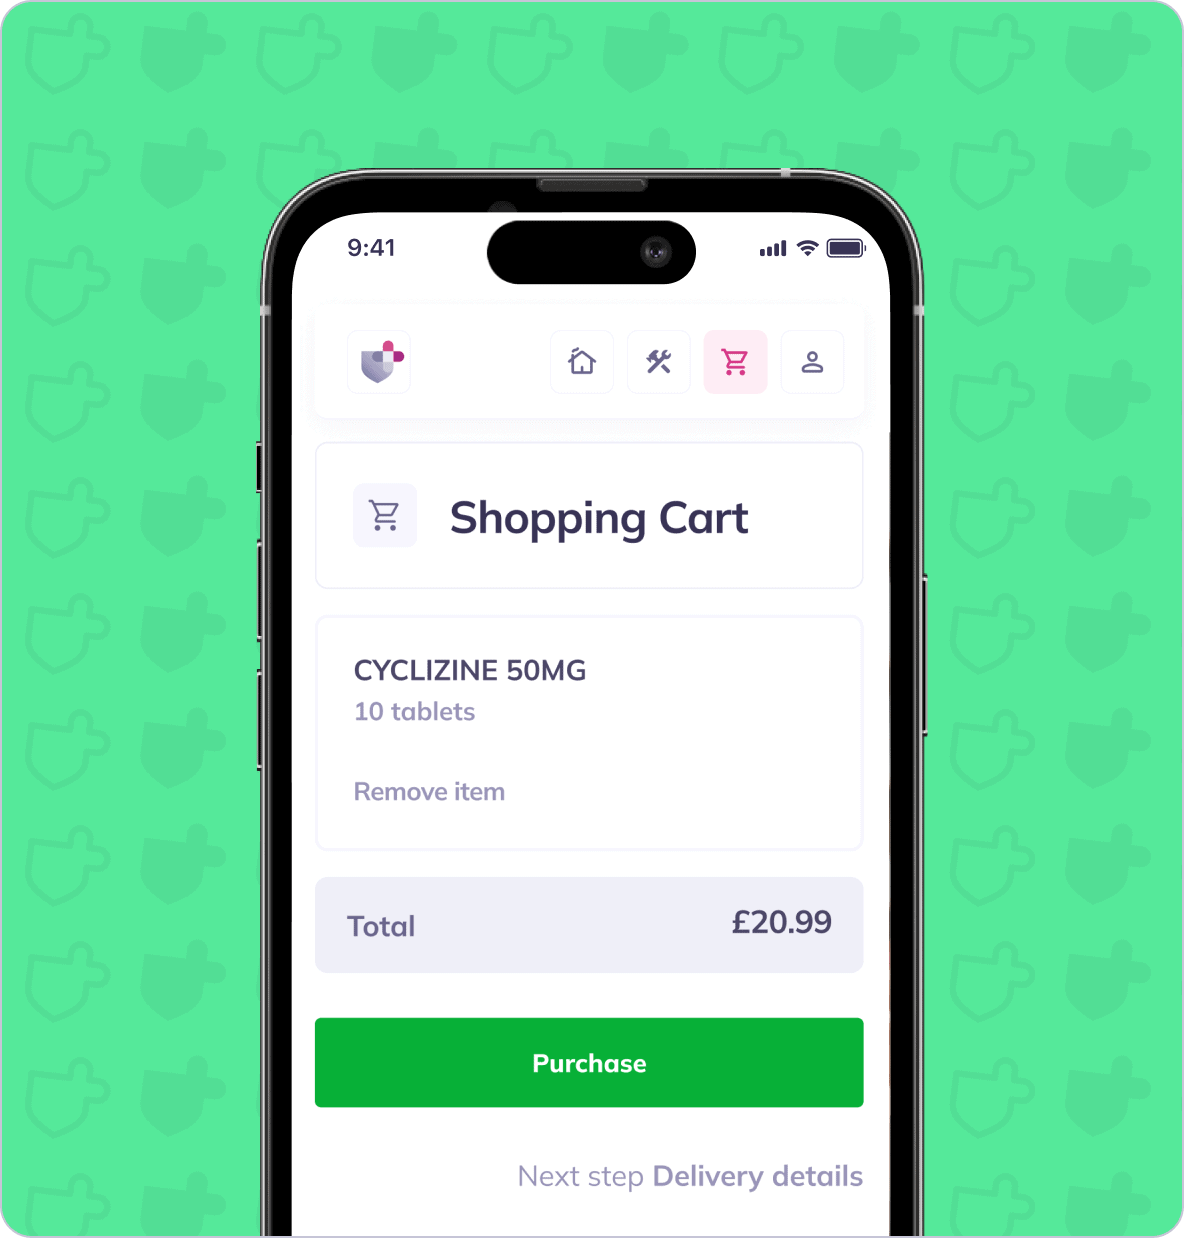 A smartphone screen displaying a shopping cart with Cyclizine 50mg (10 tablets) for £20.99. At the bottom, there is a green "Purchase" button and text indicating the next step is delivery details, highlighting seamless buying for your Private Treatment Plans.